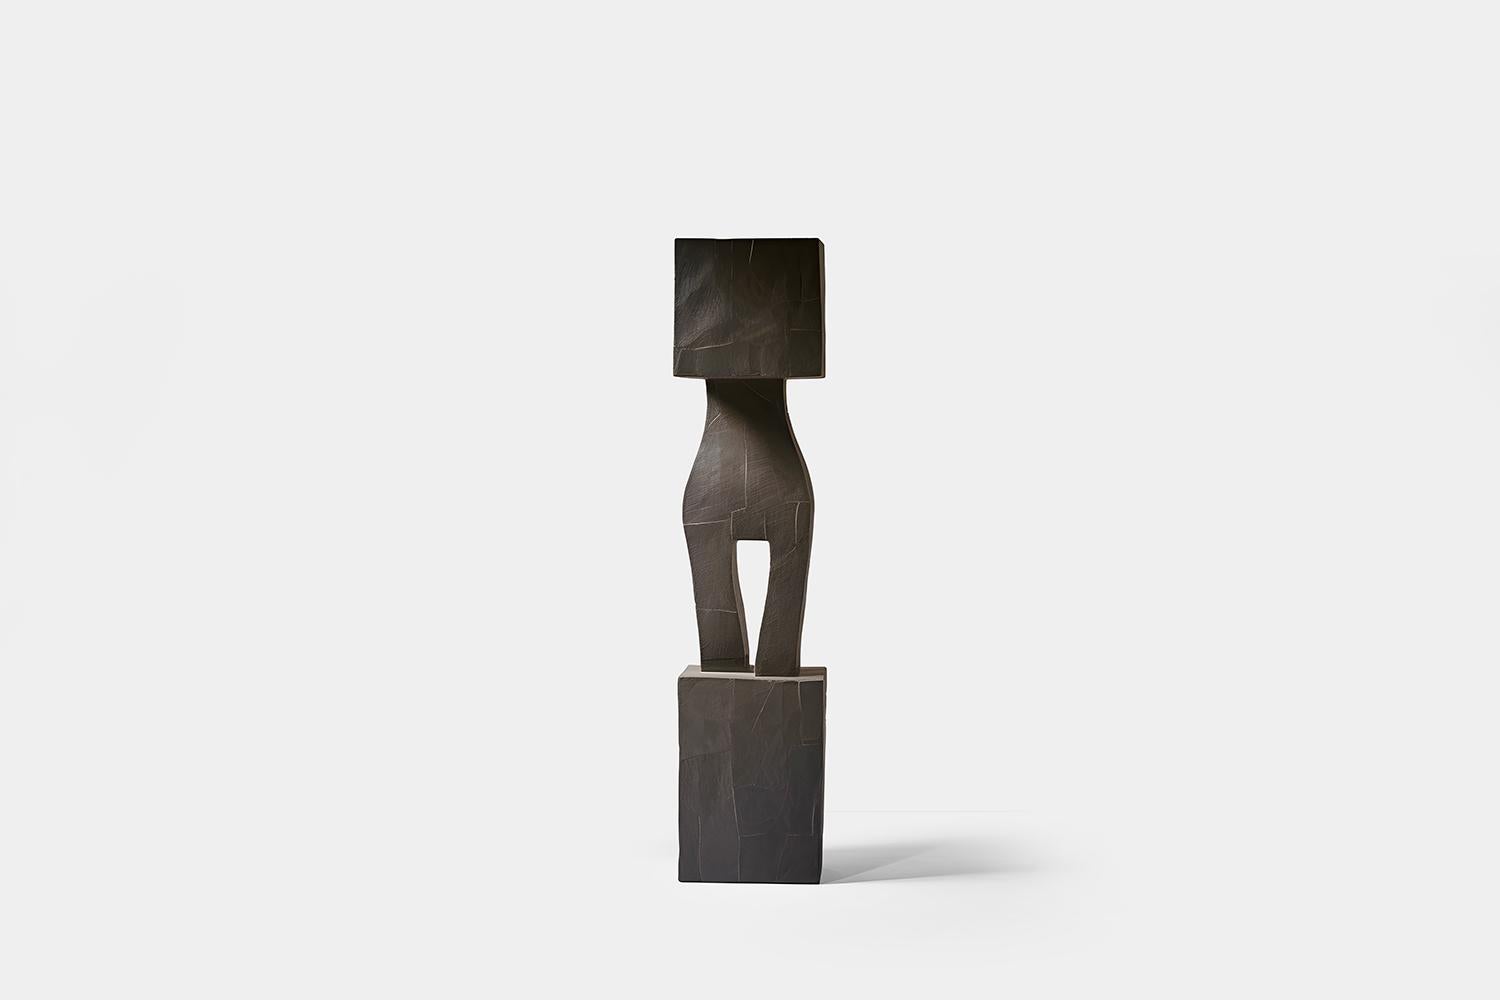 Monumental Wooden Sculpture Inspired in Constantin Brancusi Style, Unseen Force 29 by Joel Escalona

This monolithic sculpture, designed by the talented Artist Joel Escalona, is a towering example of beauty in craftsmanship. Hand and digital machine